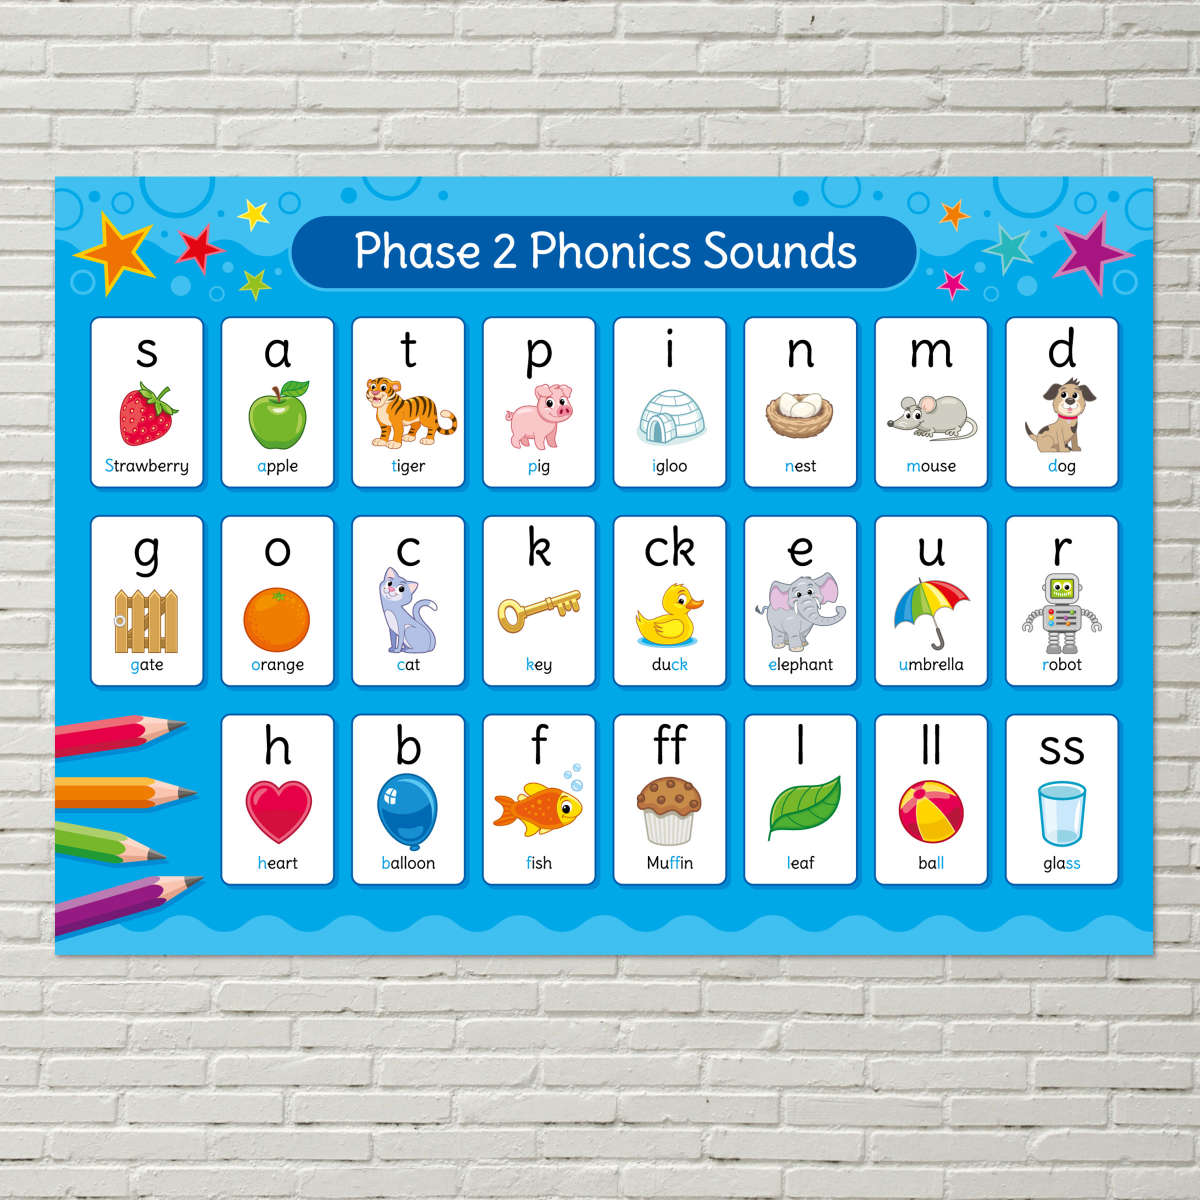 Phonics Phase 2 Sounds Poster - English Poster for Schools